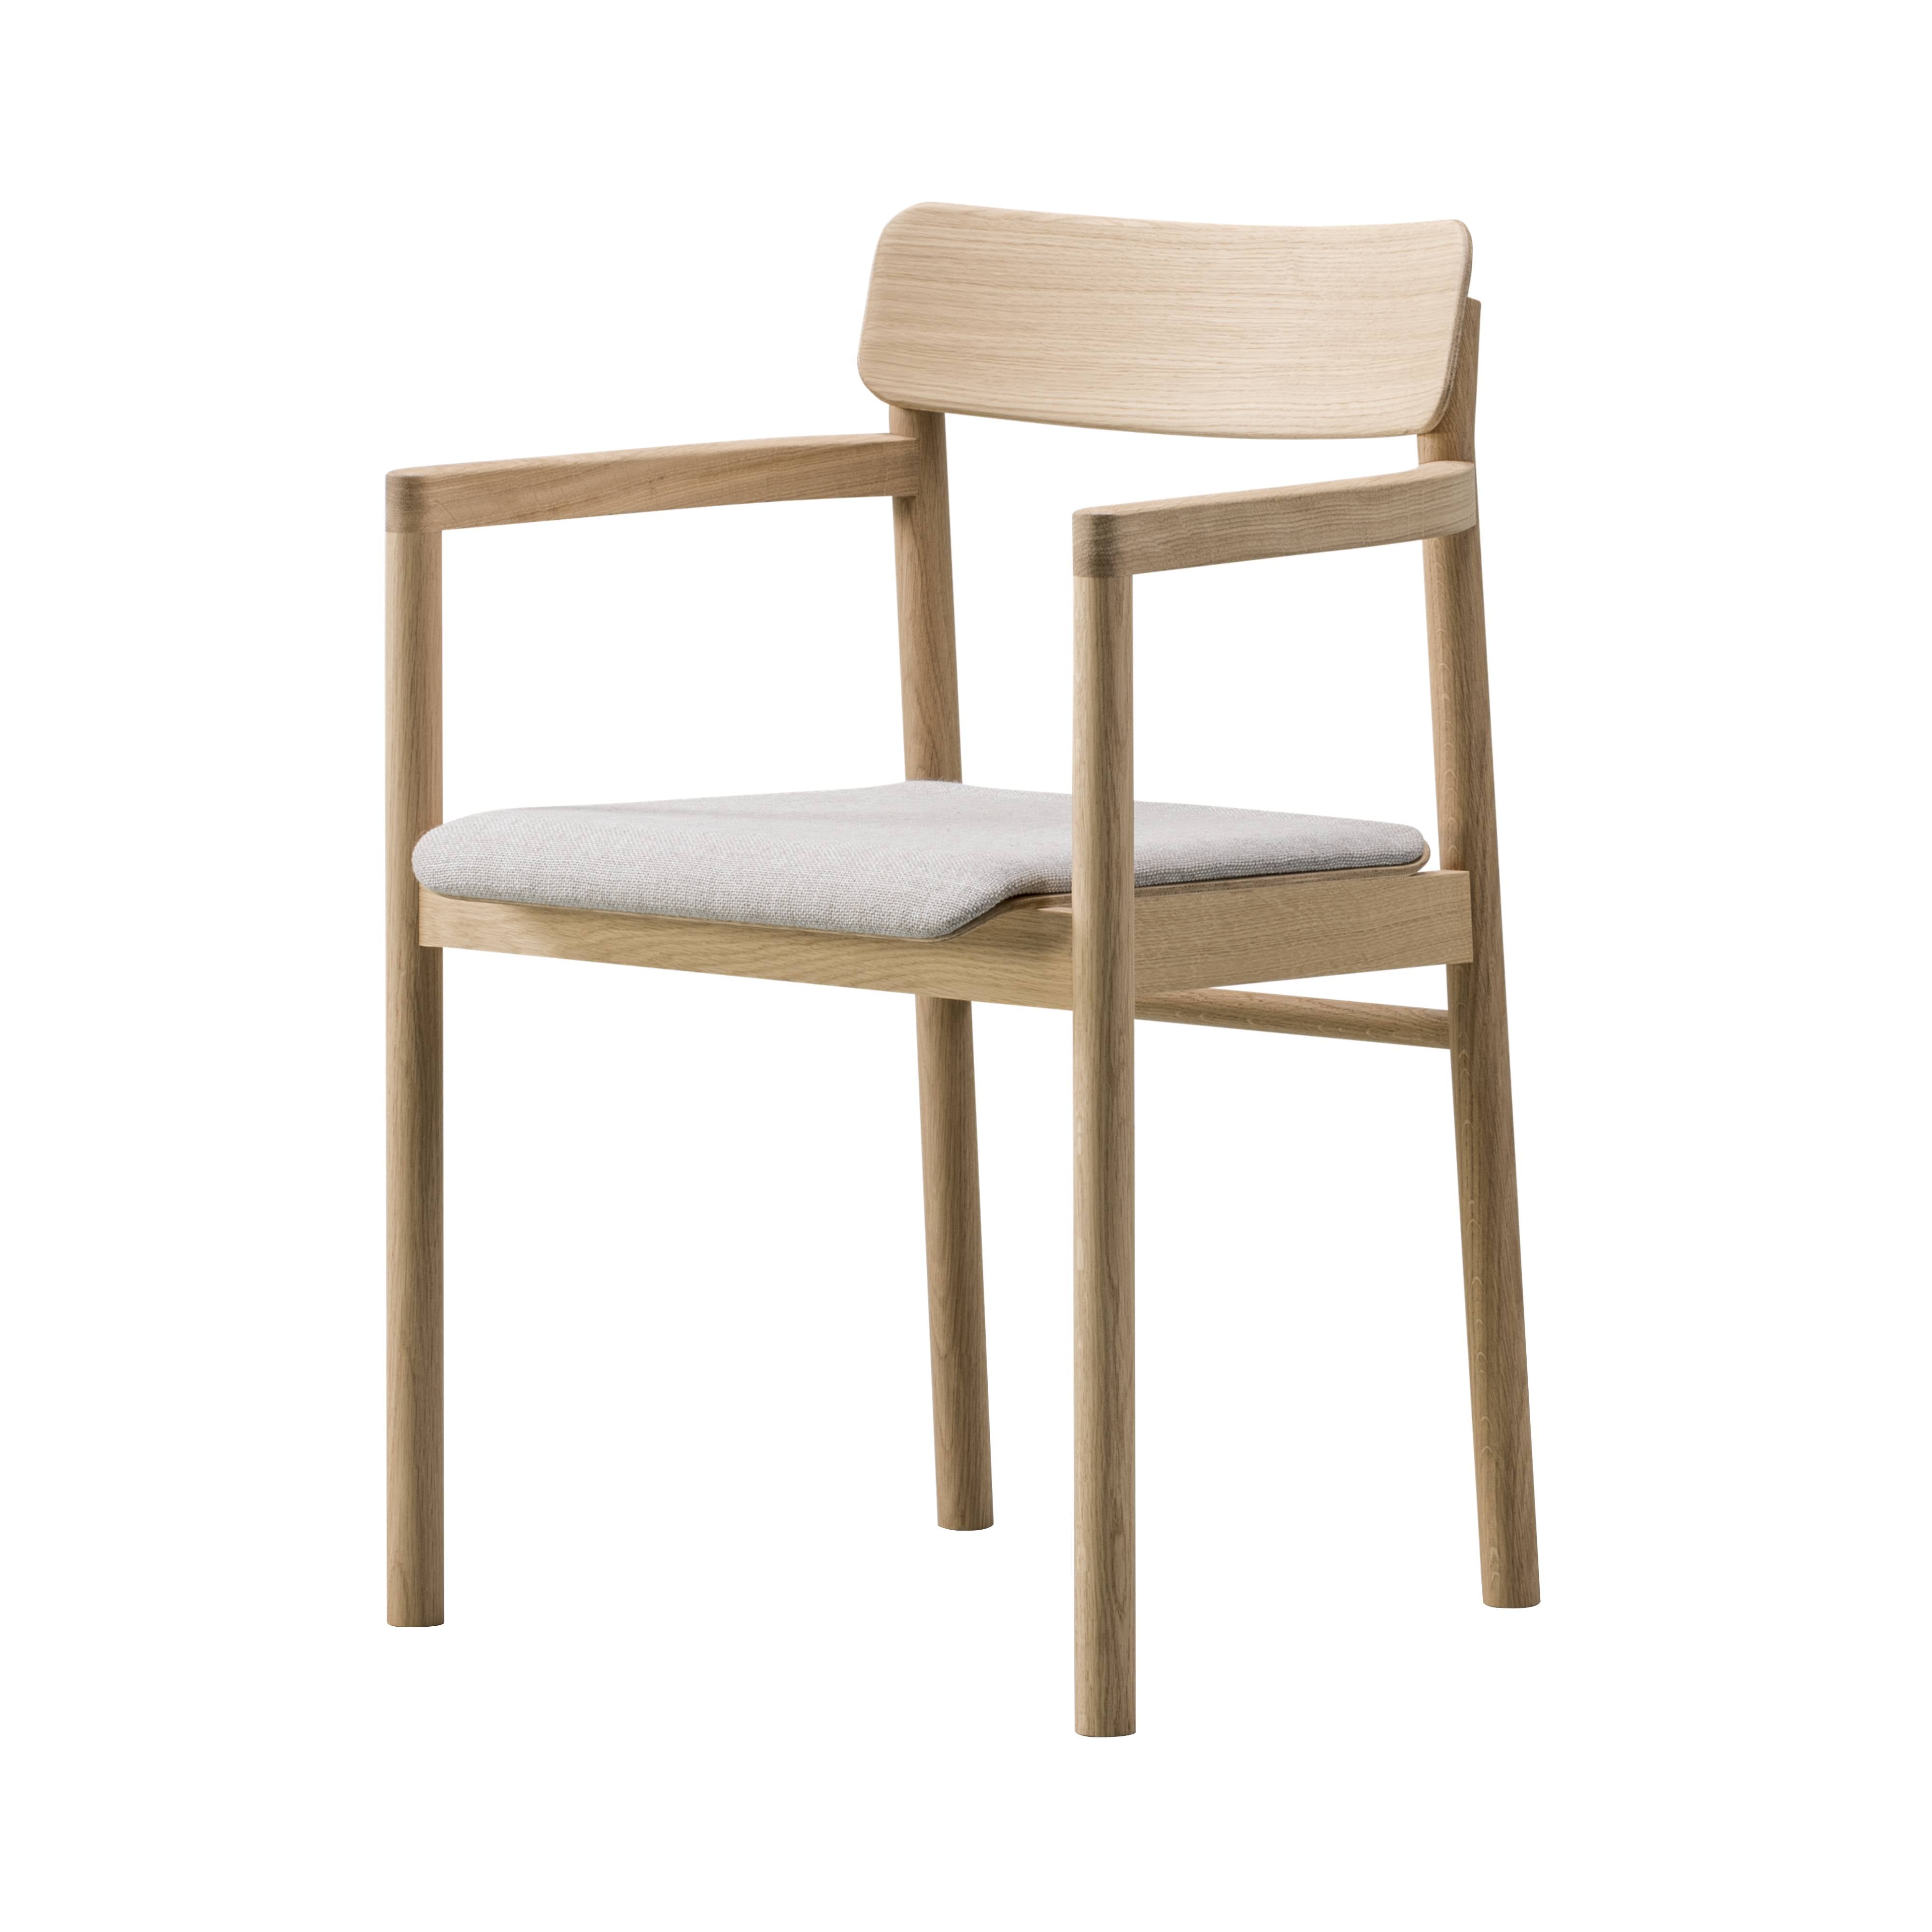 Post Chair: Seat Upholstered + Lacquered Oak